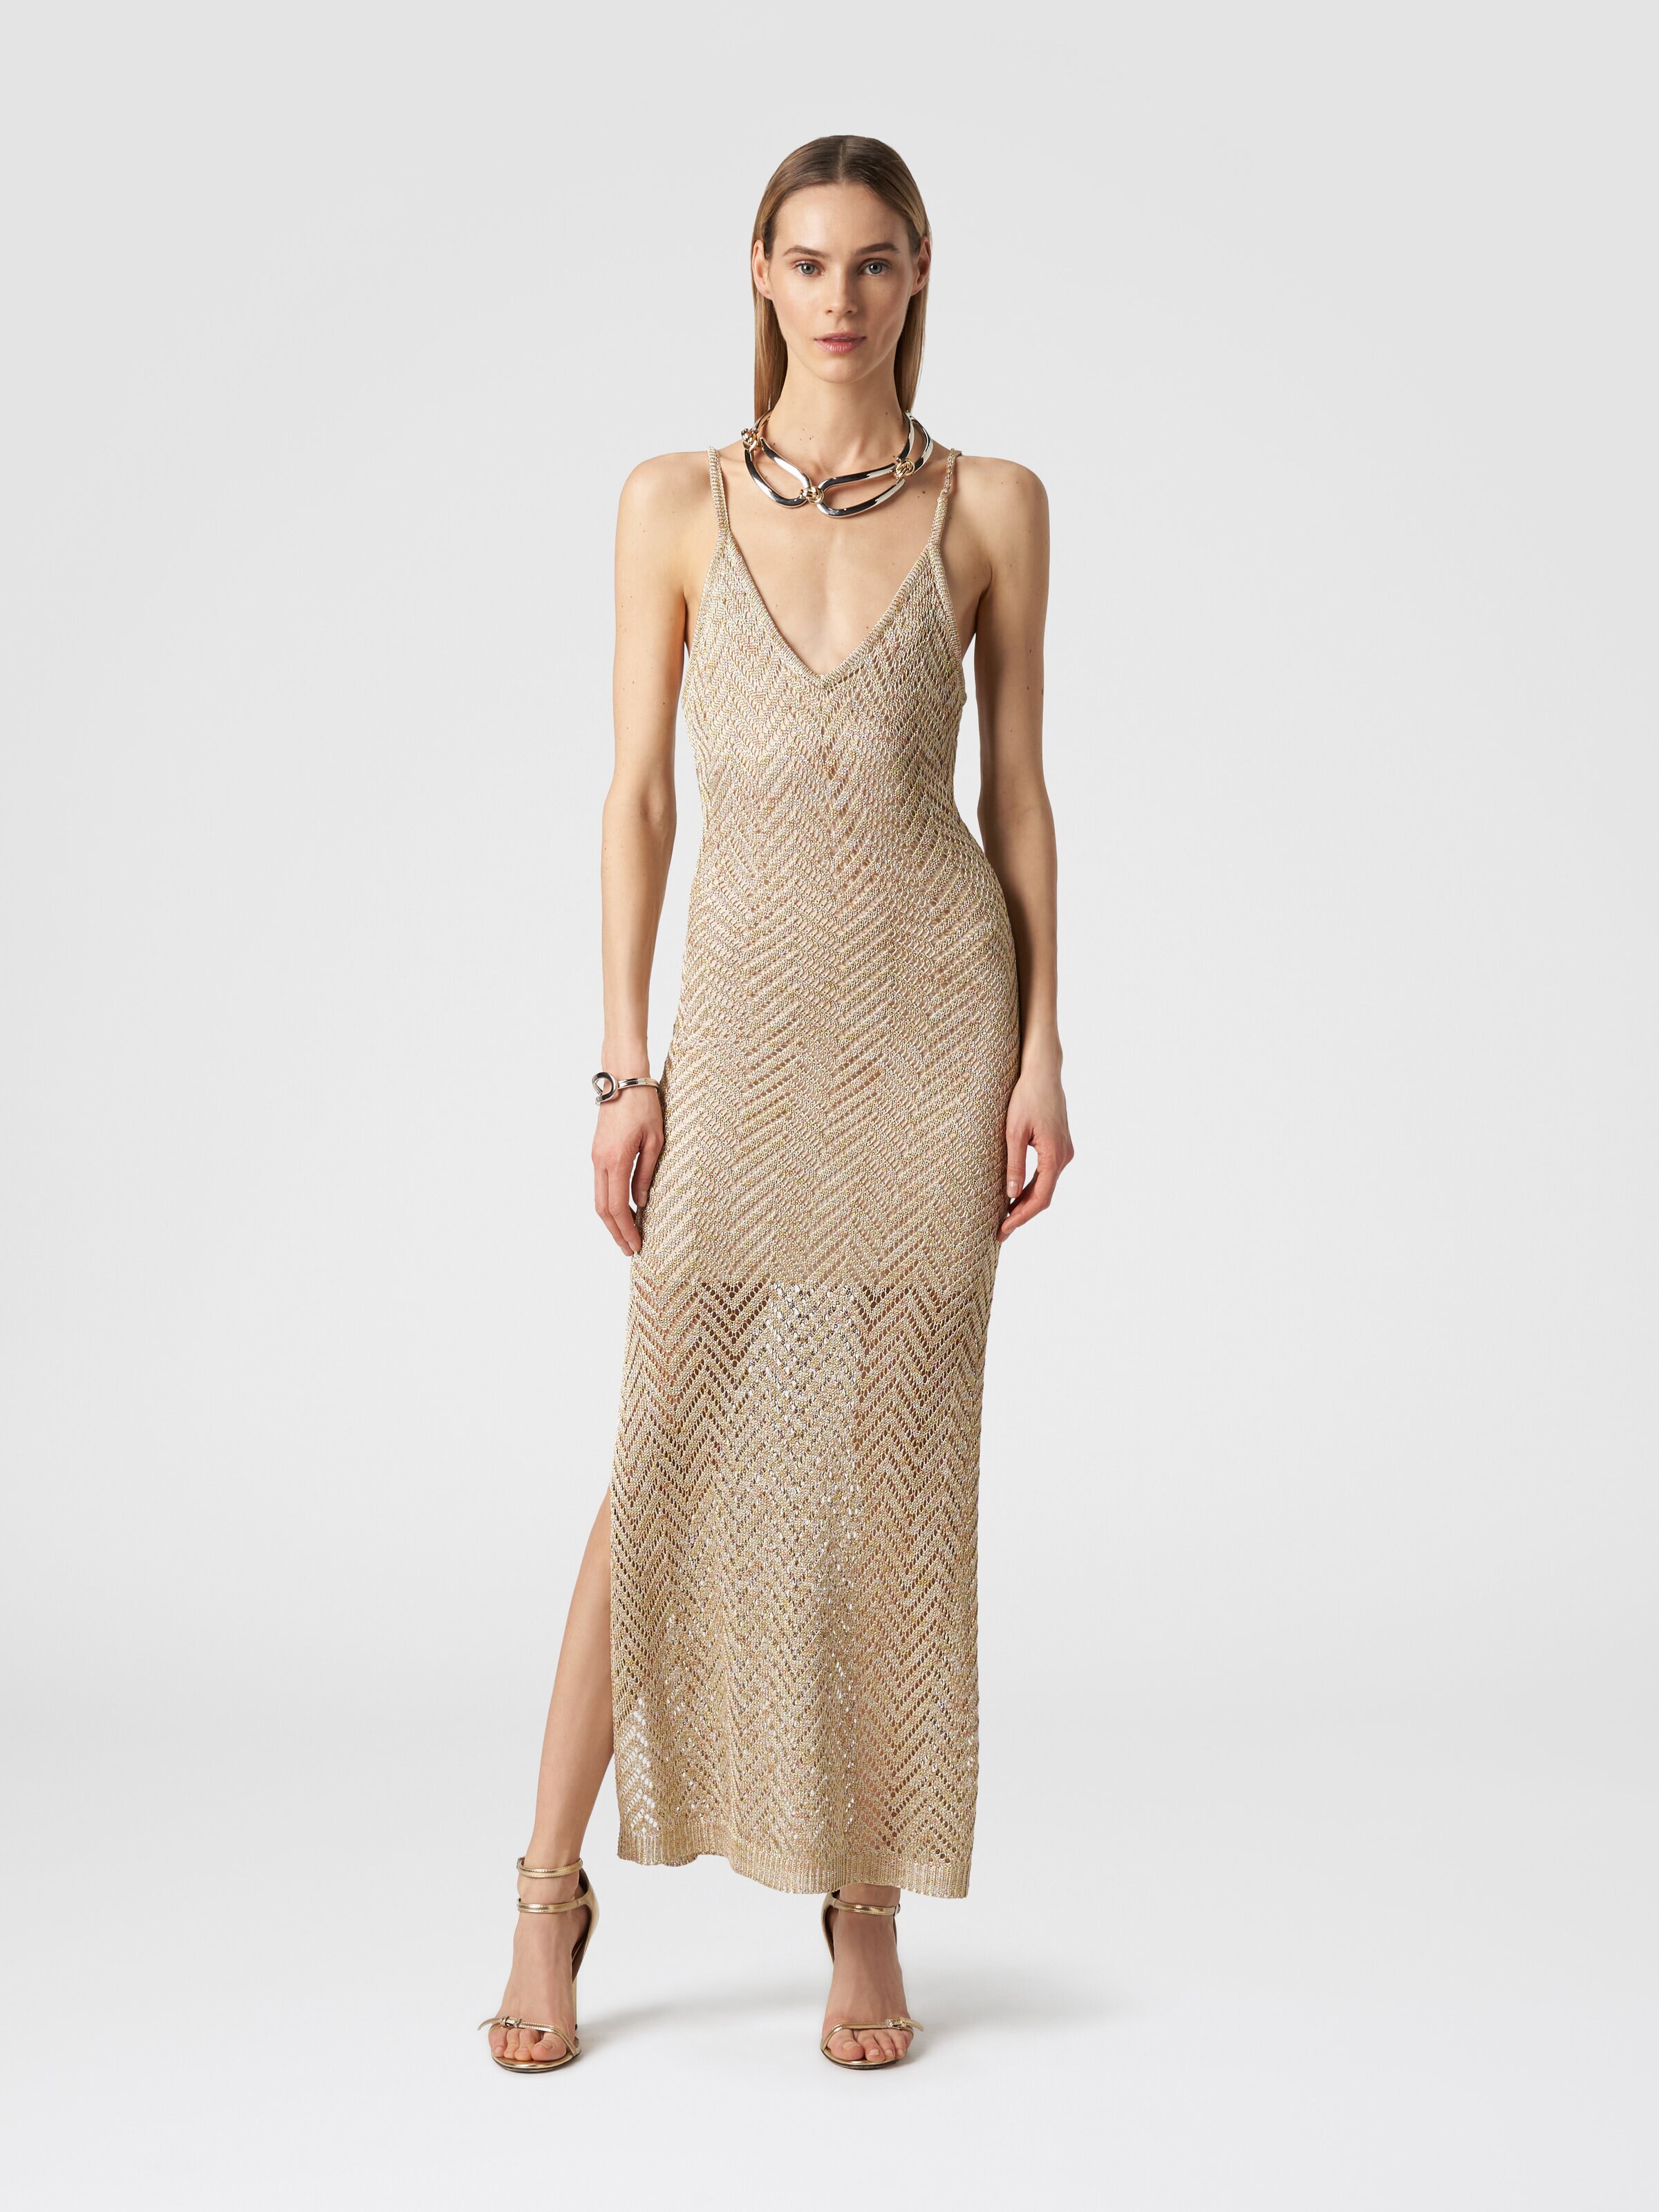 Dress in zigzag knit with crochet-effect weave, Gold - 1